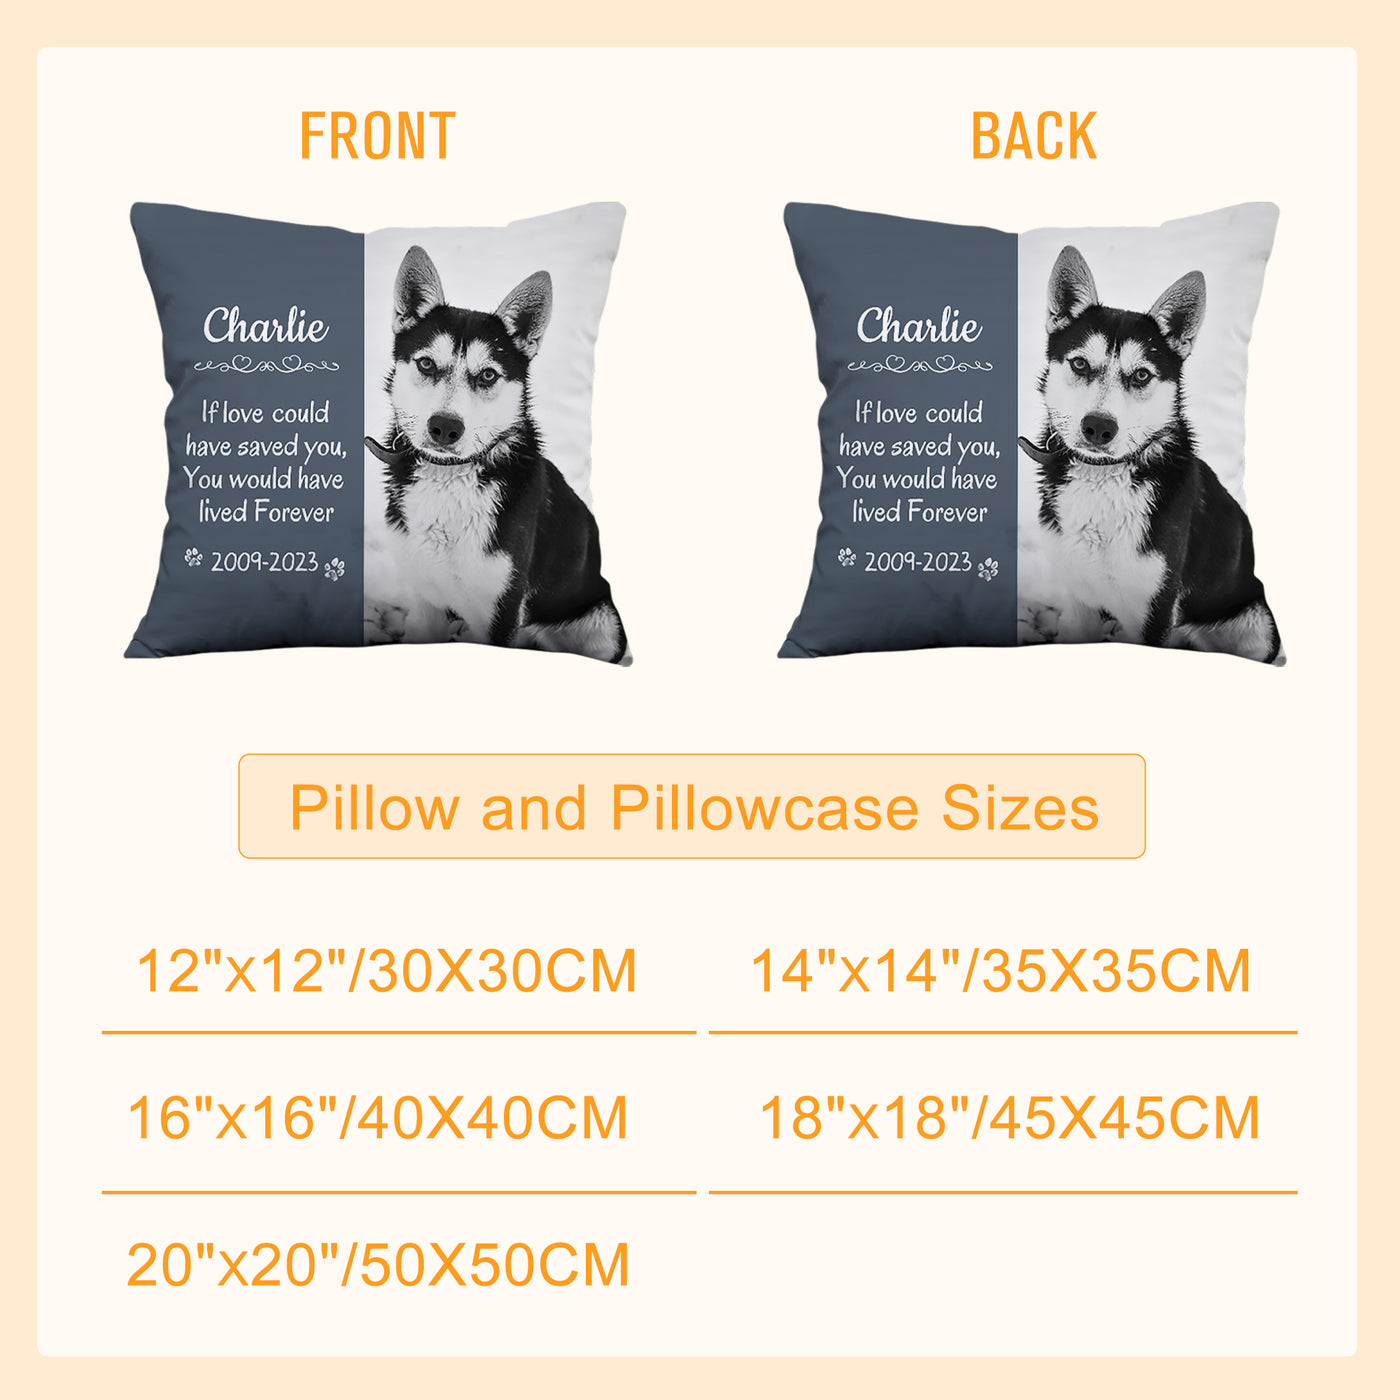 Pet Memorial Pillow with Dog Portrait Personalized Sympathy Gift for Loss of Pet - The Pet Pillow